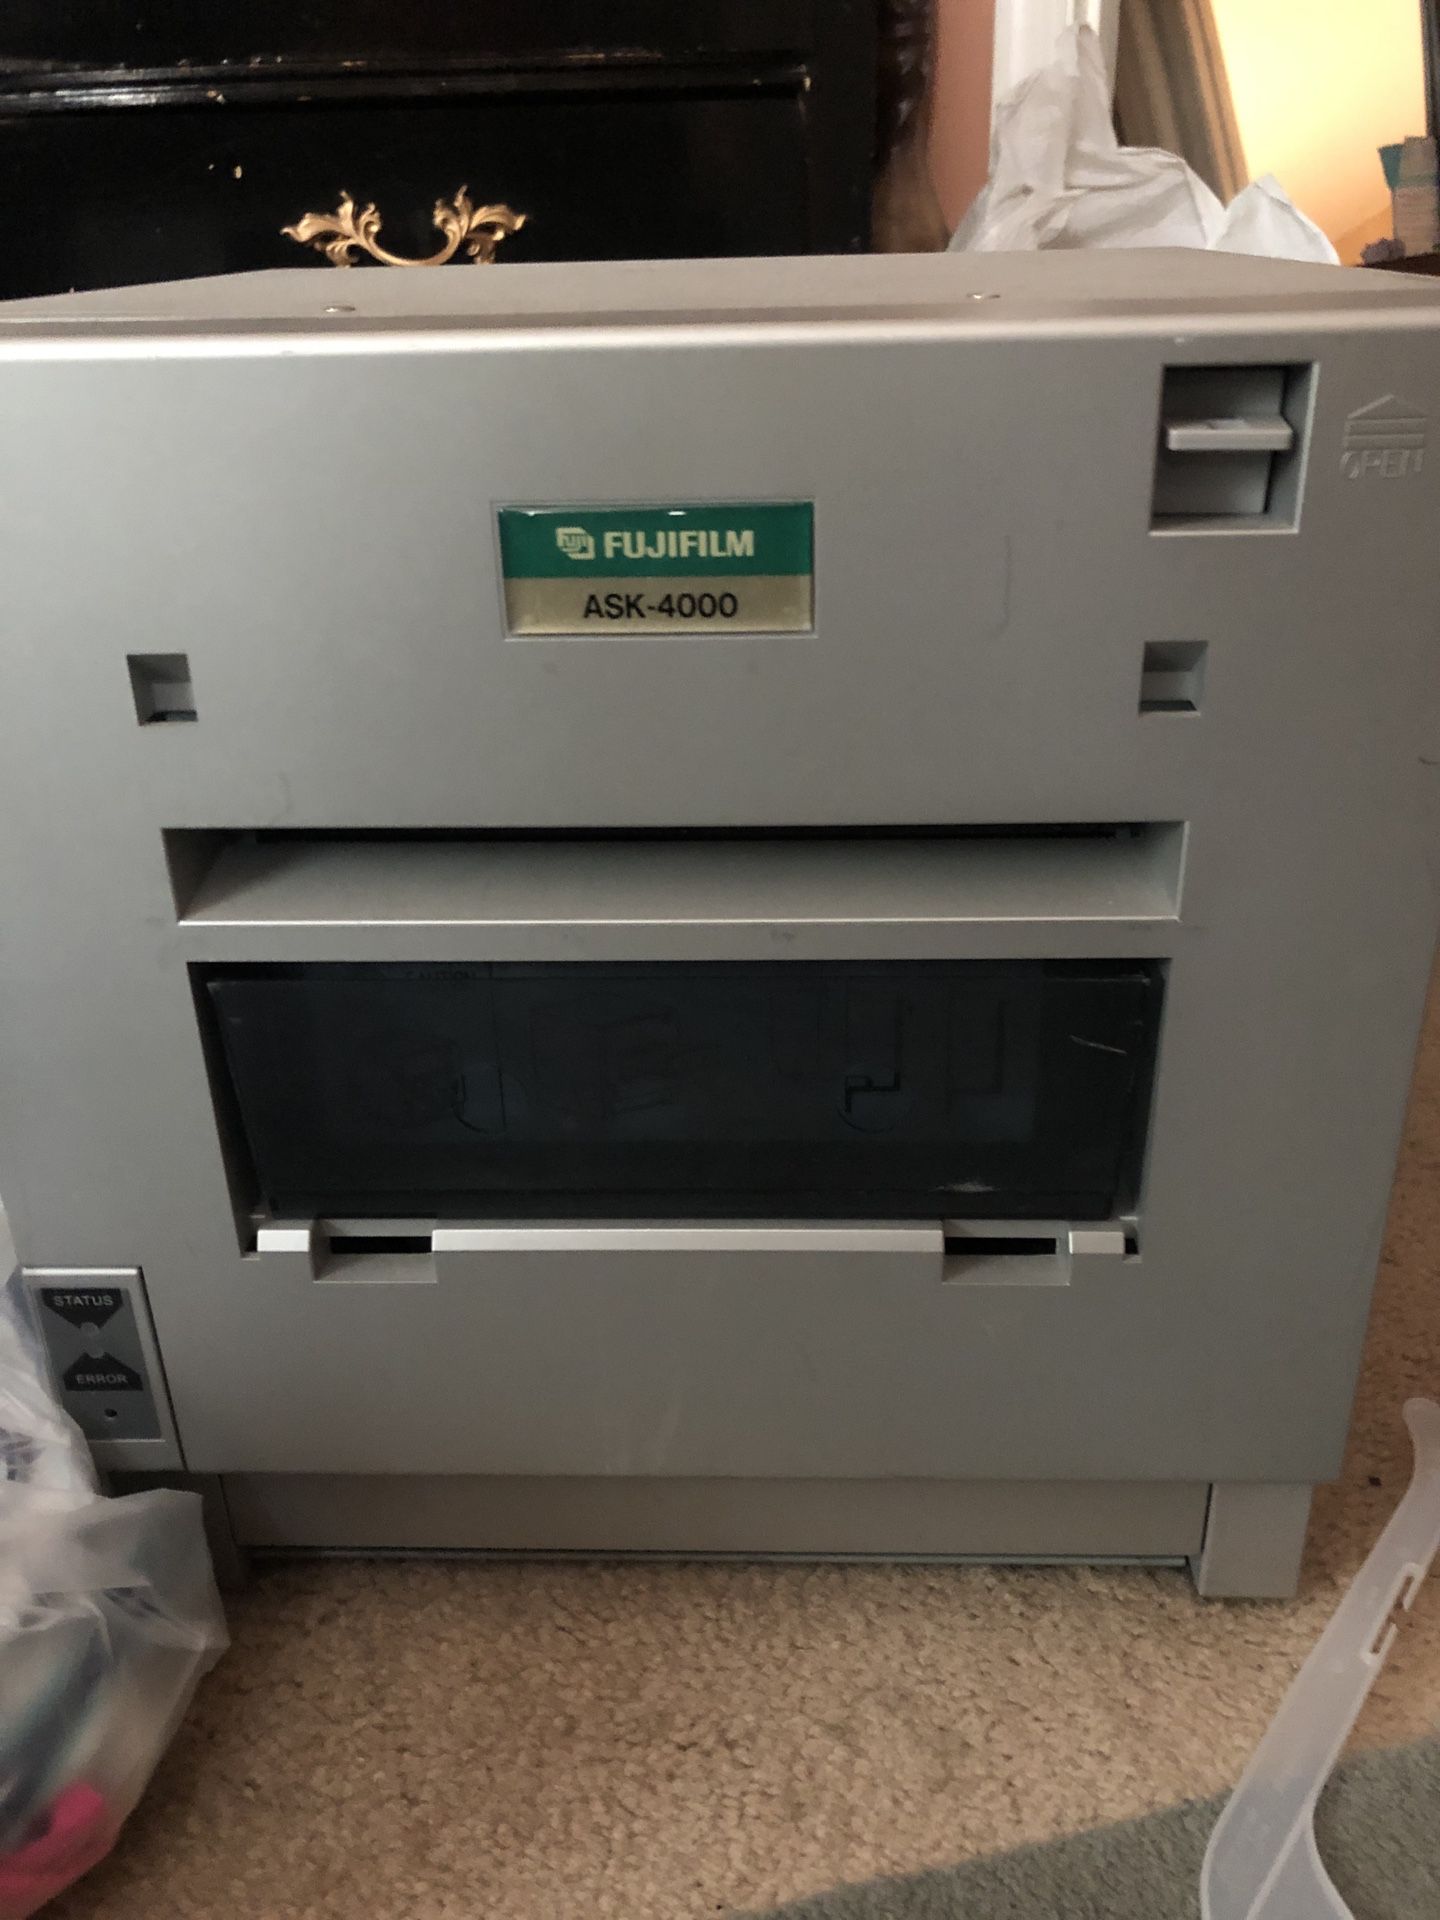 Photo printer with paper and ink fujifilm ask-4000 for 200 or OBO